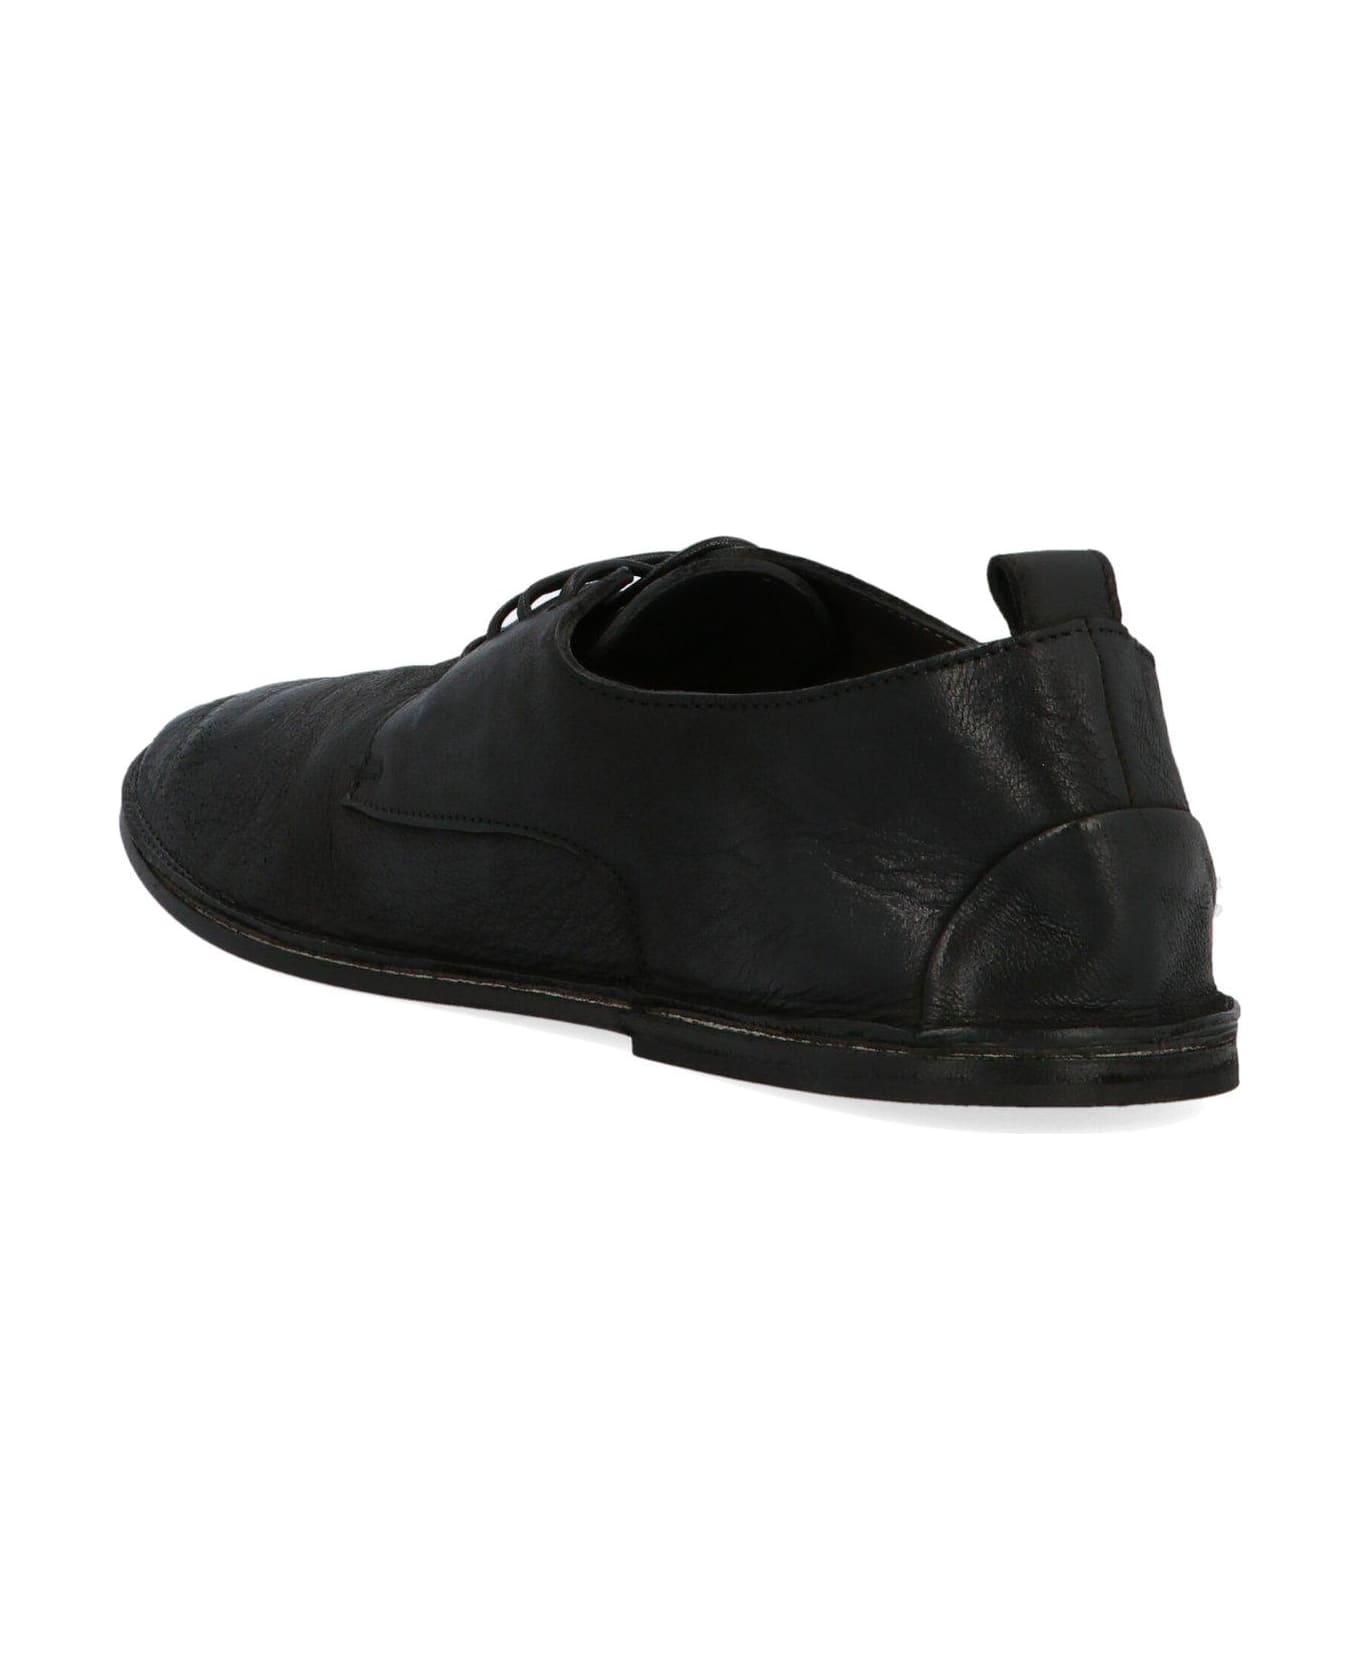 Marsell Strasacco Lace-up Shoes - BLACK